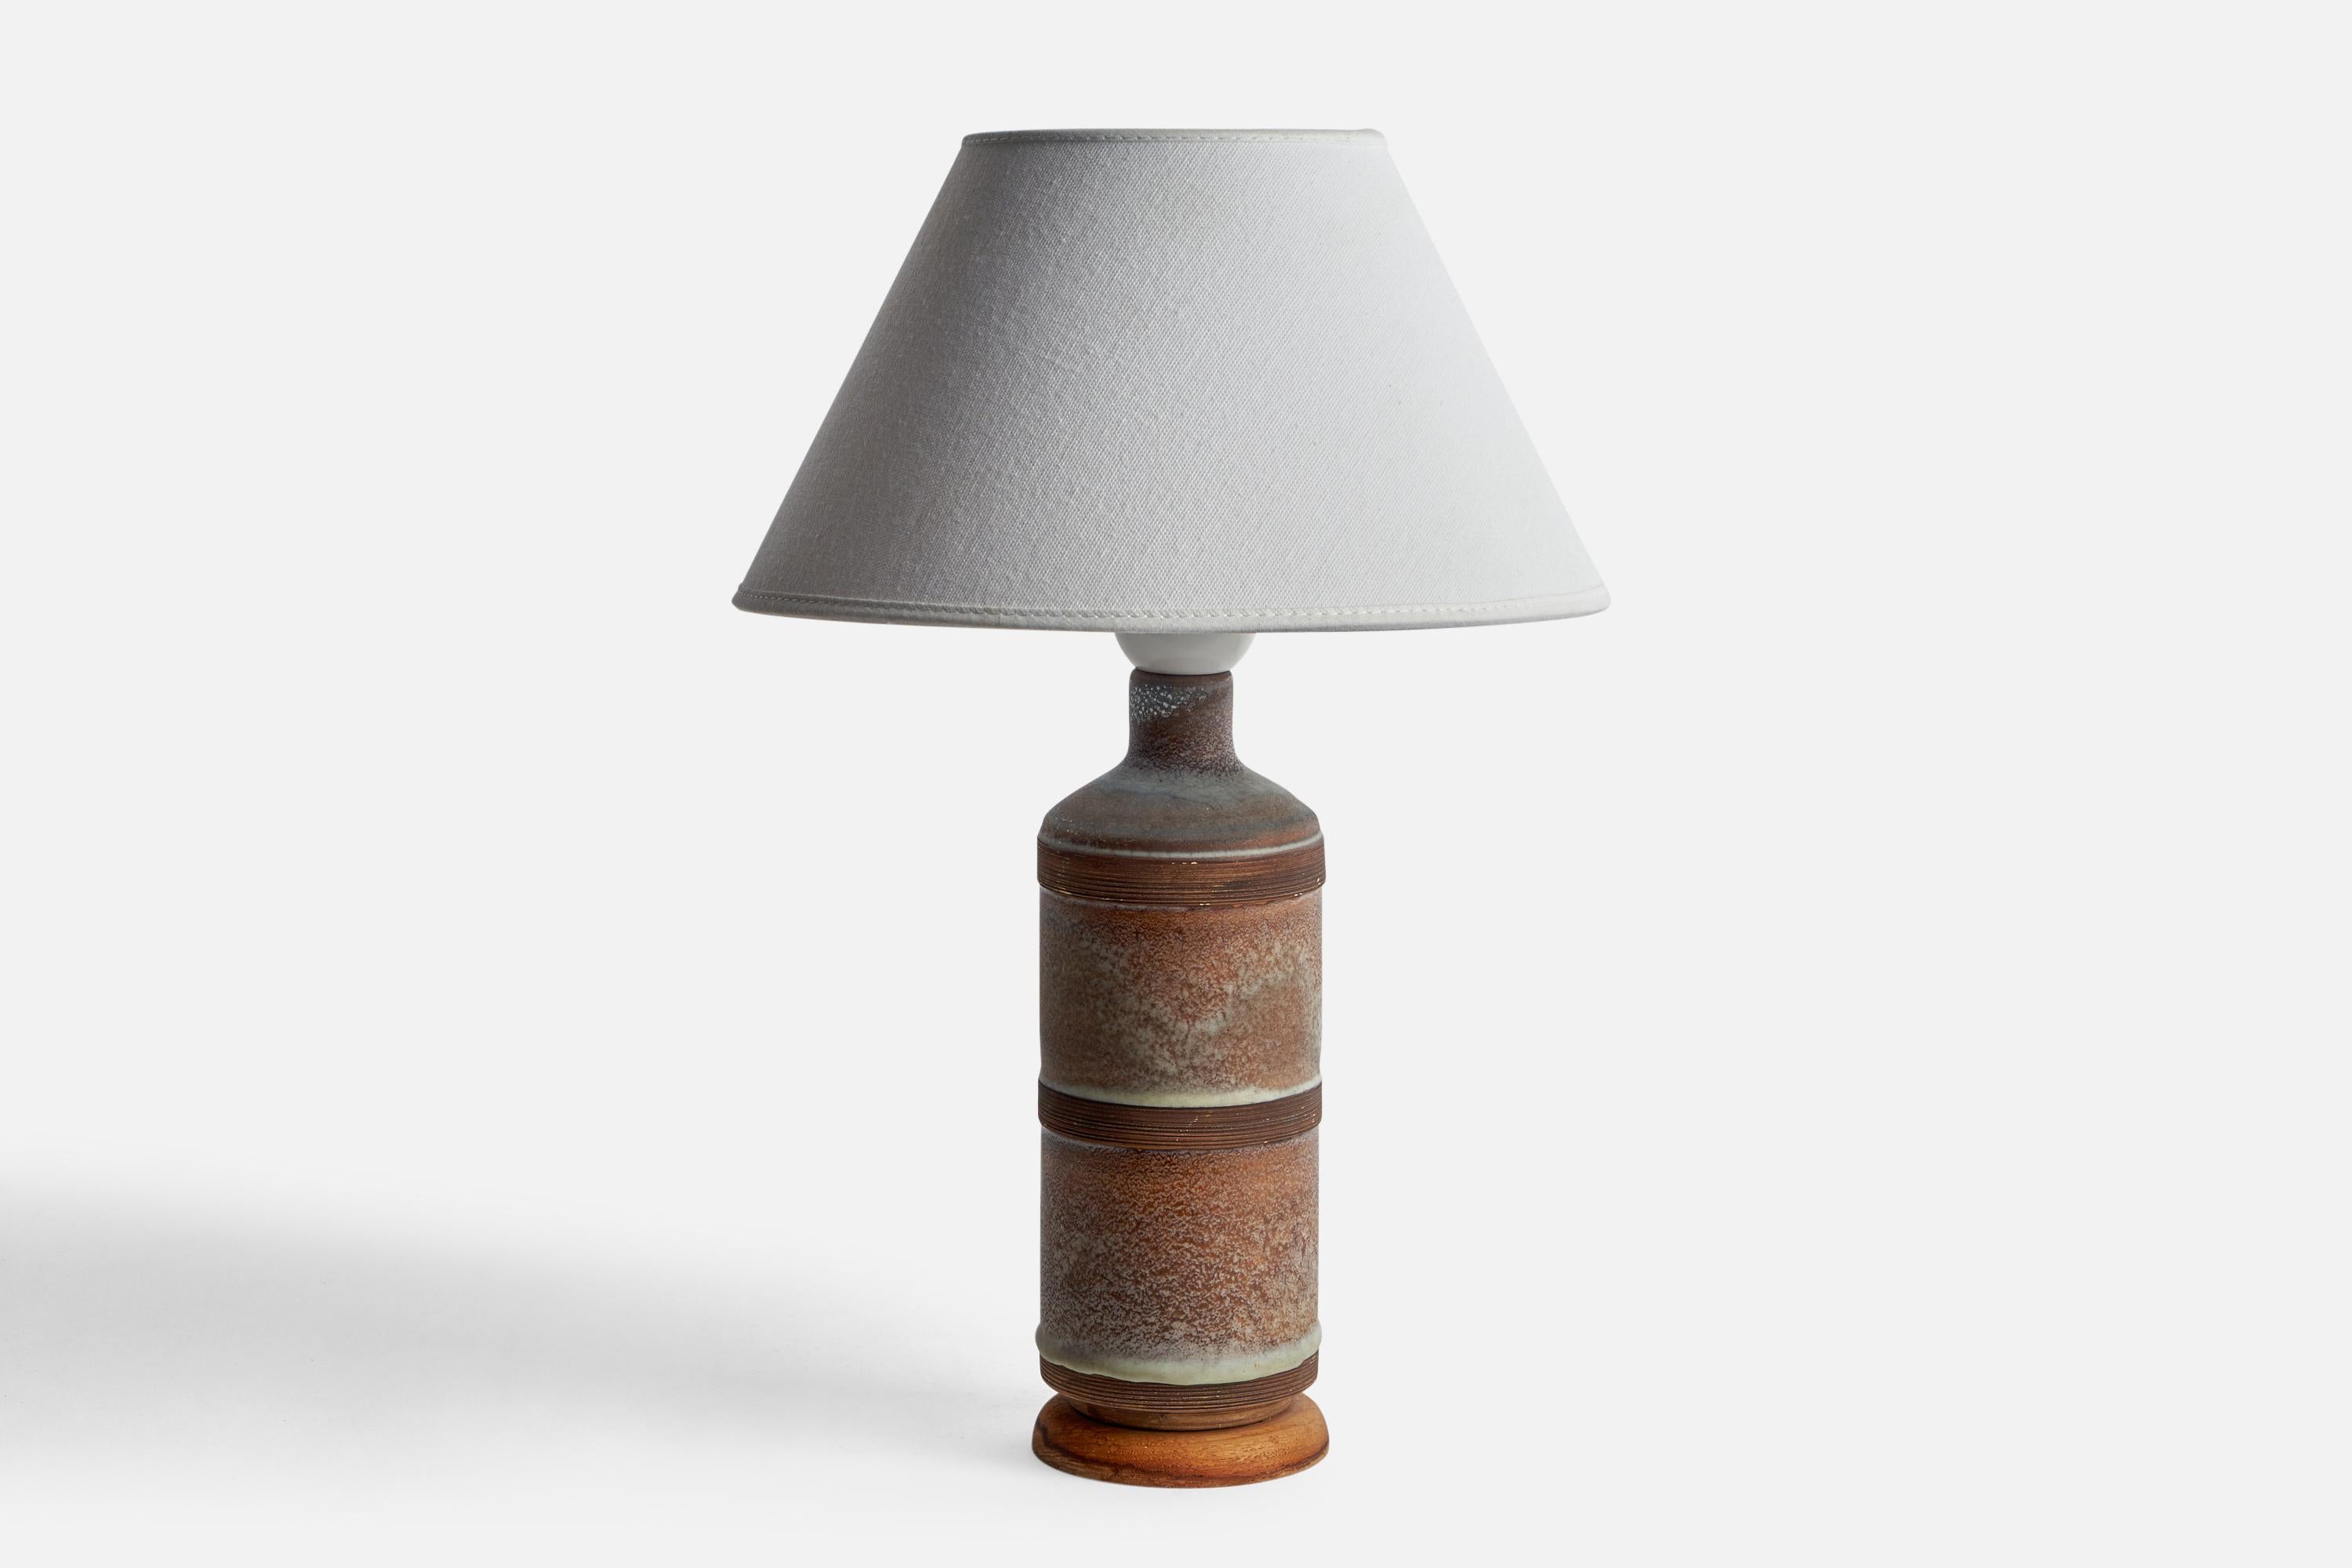 A grey and brown-glazed ceramic and wood table lamp designed and produced in Sweden, 1950s.

Dimensions of Lamp (inches): 11.7” H x 3.45” Diameter
Dimensions of Shade (inches): 4.5” Top Diameter x 10” Bottom Diameter x 5.25” H
Dimensions of Lamp